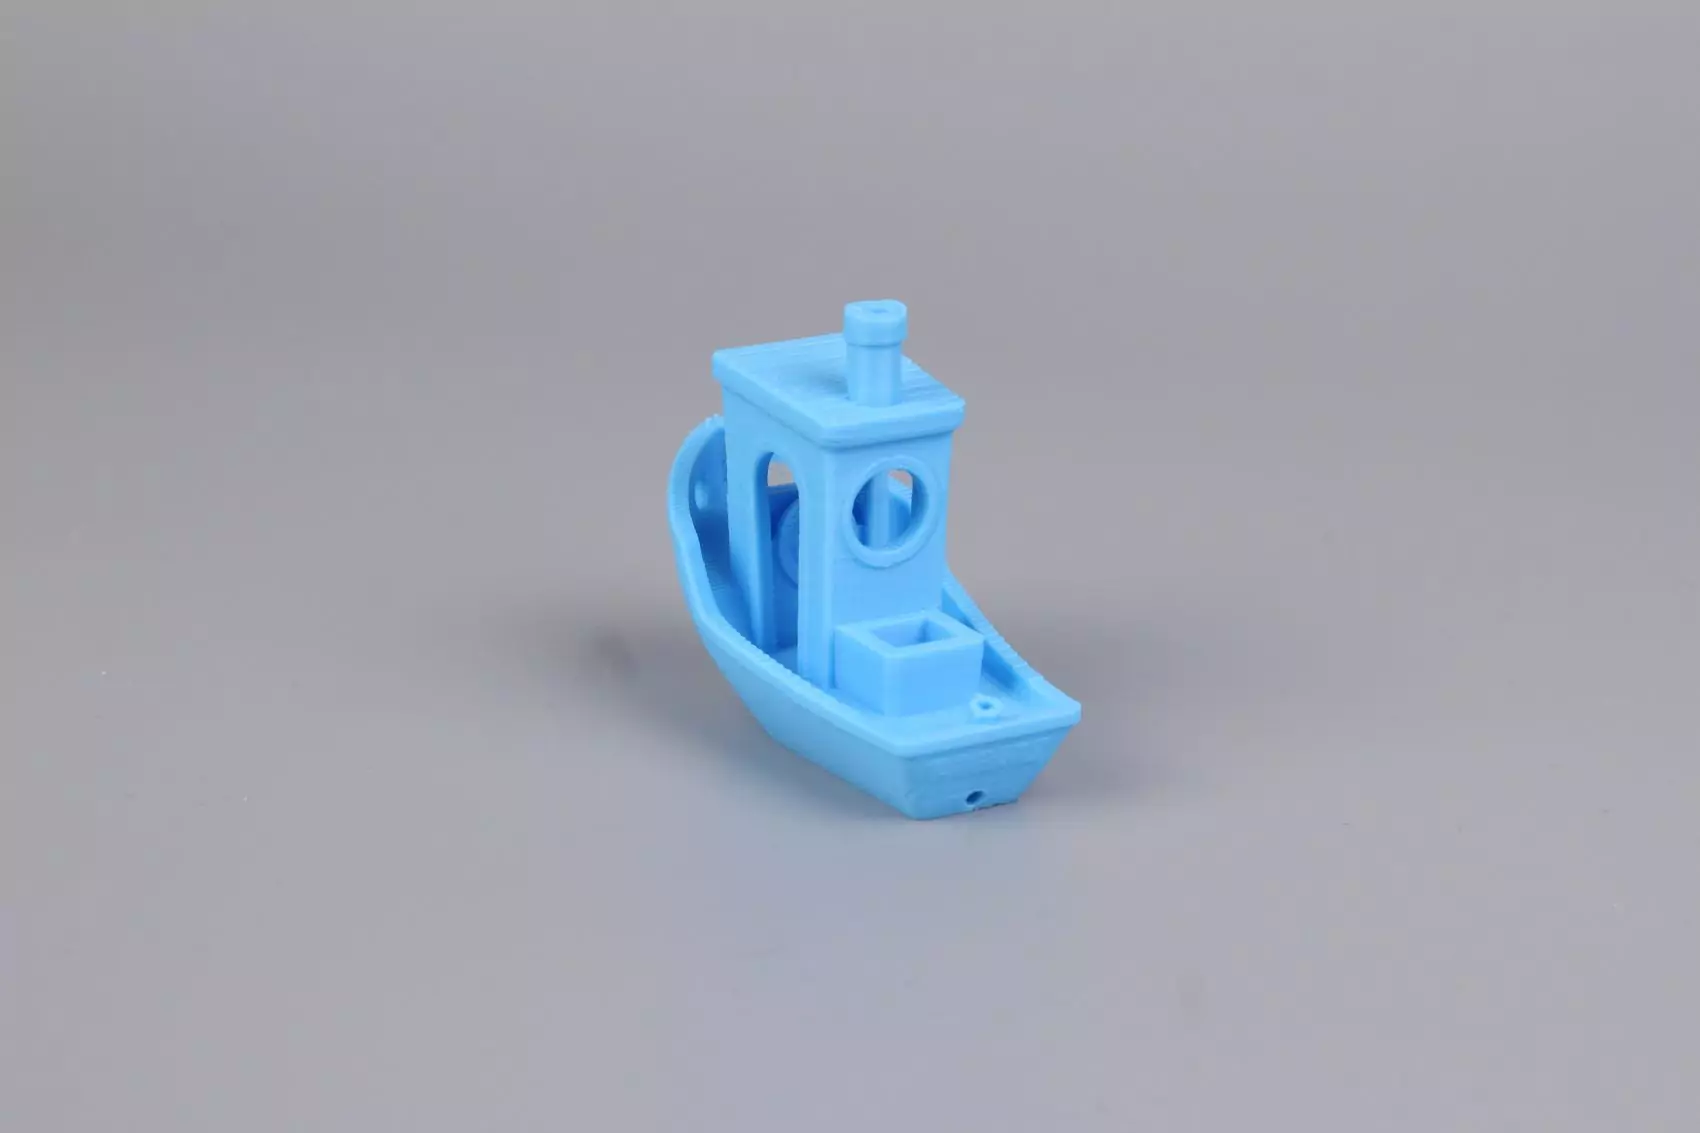 Ender 5 S1 Review 3D benchy3 | Creality Ender-5 S1 Review: Is it a worthy upgrade?